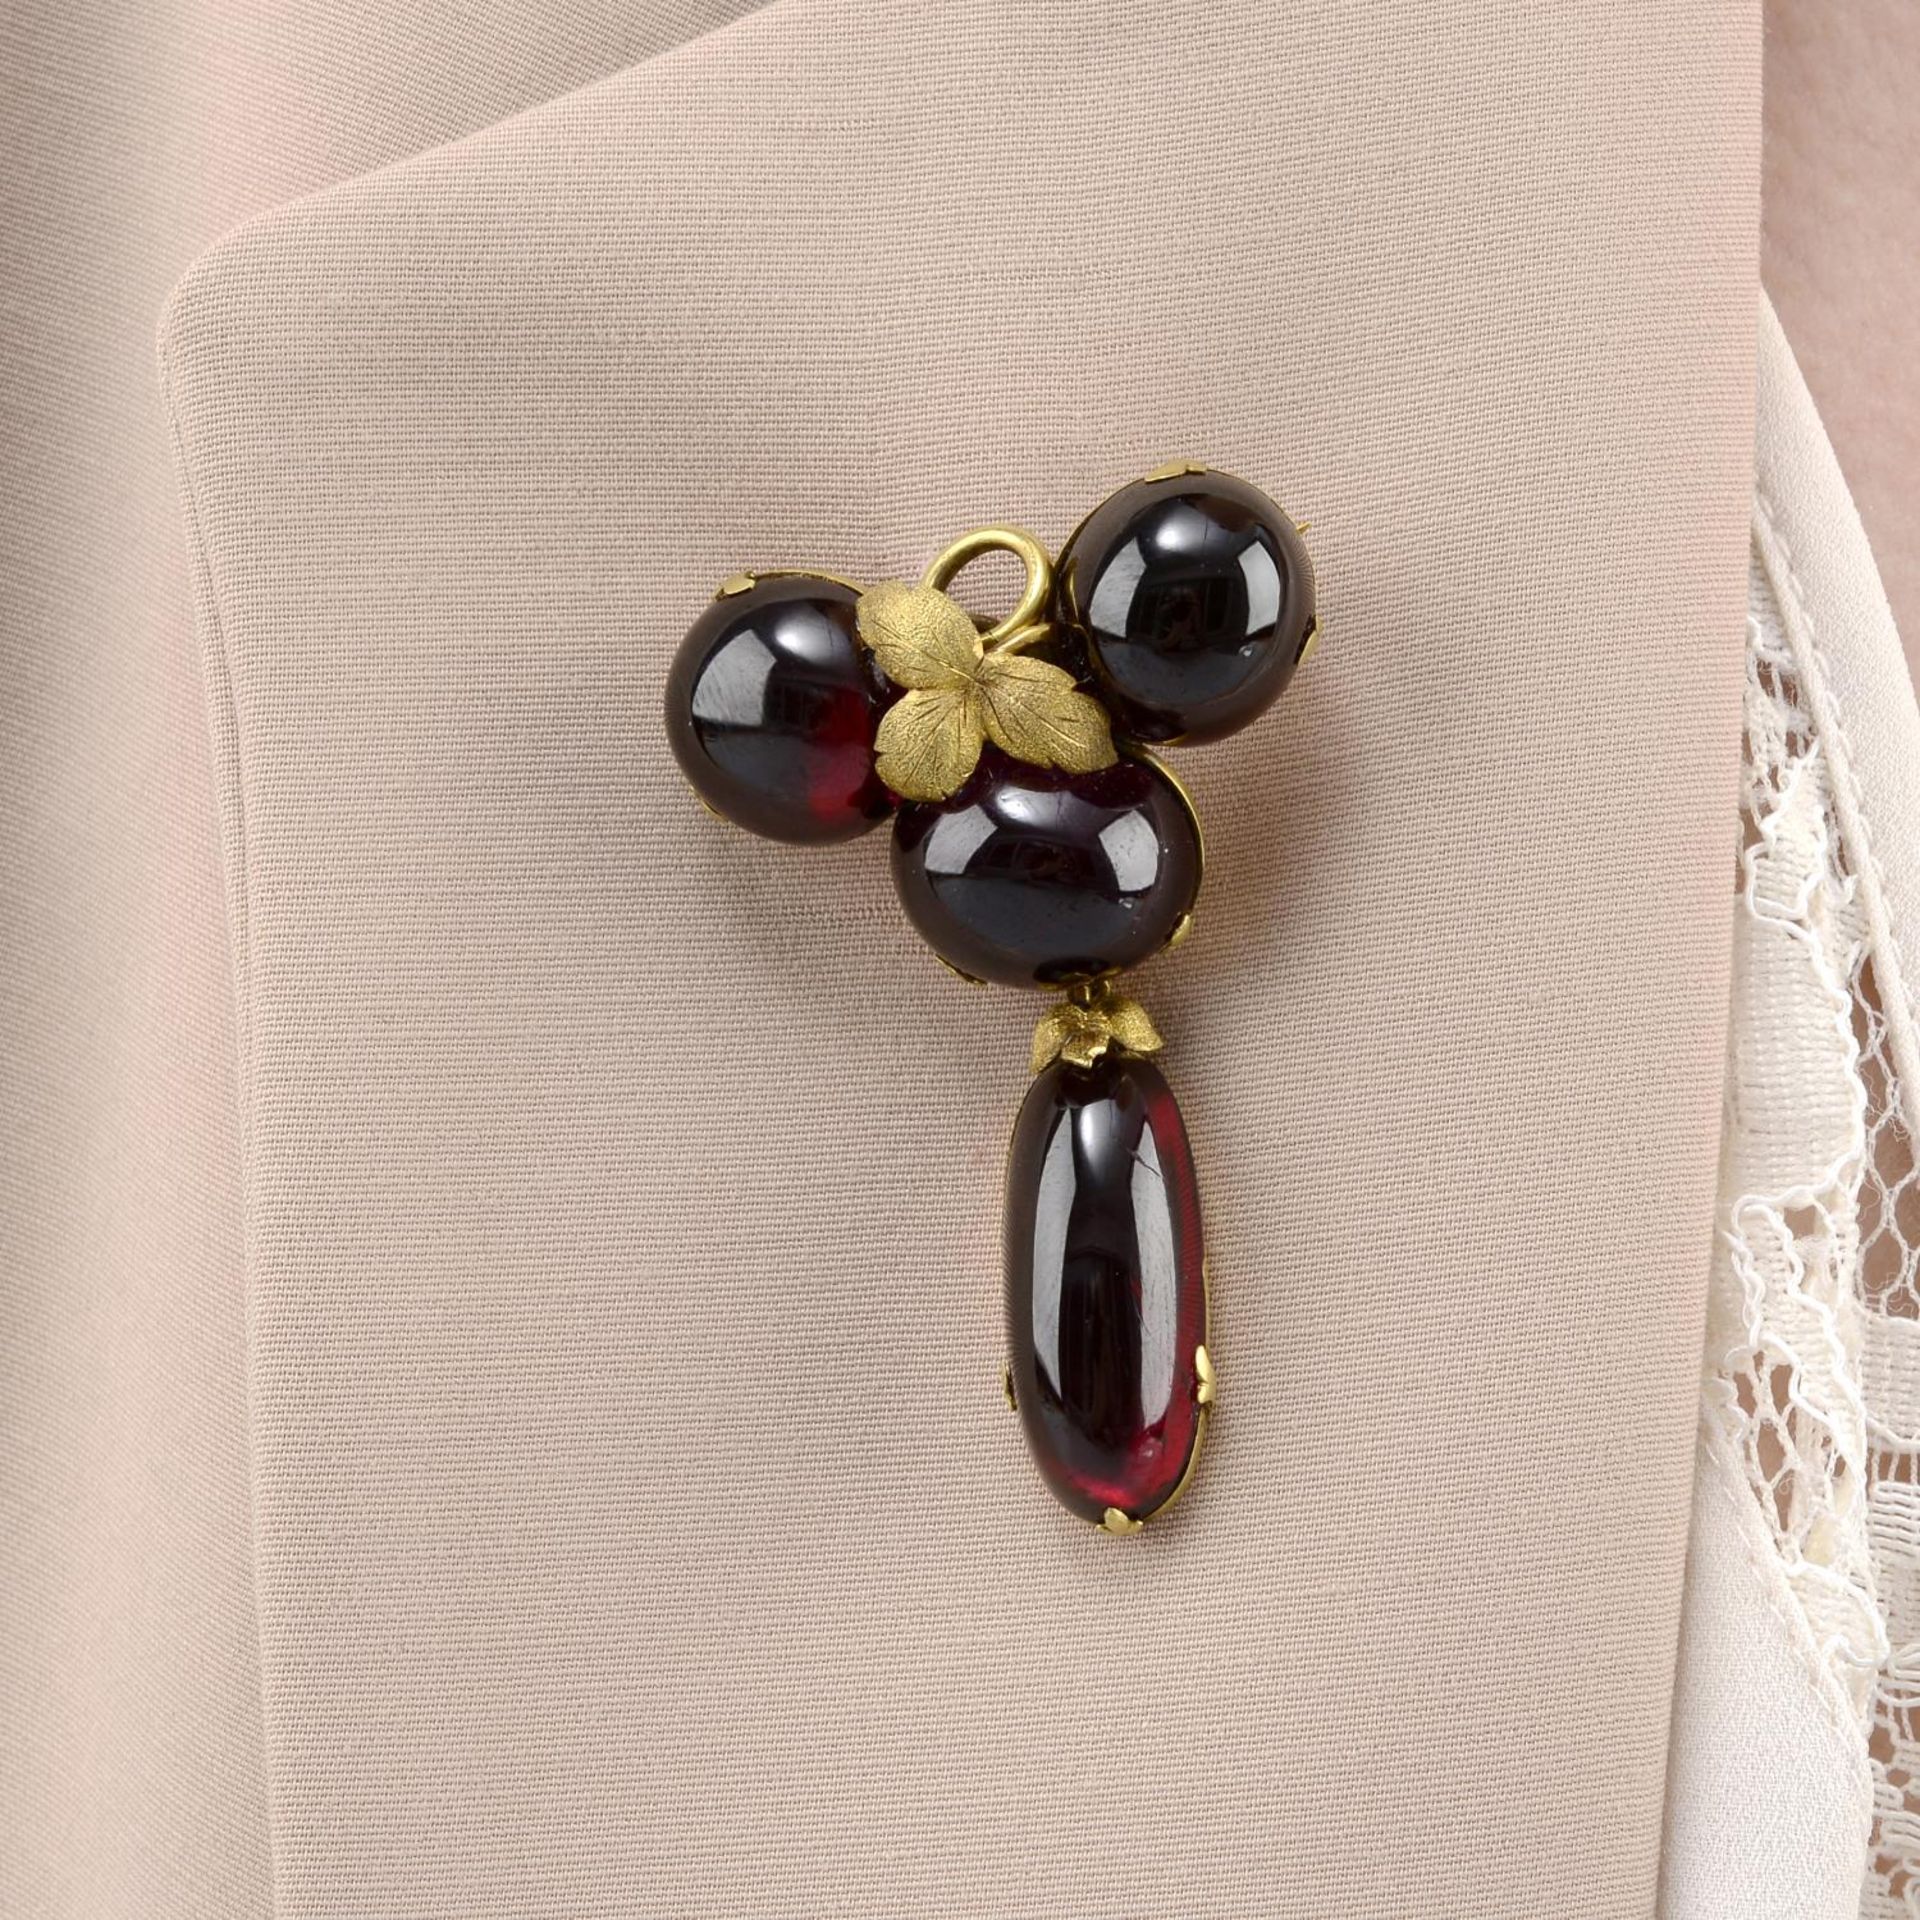 A late 19th century garnet cabochon brooch.May also be worn as a pendant.Length 5.6cms.